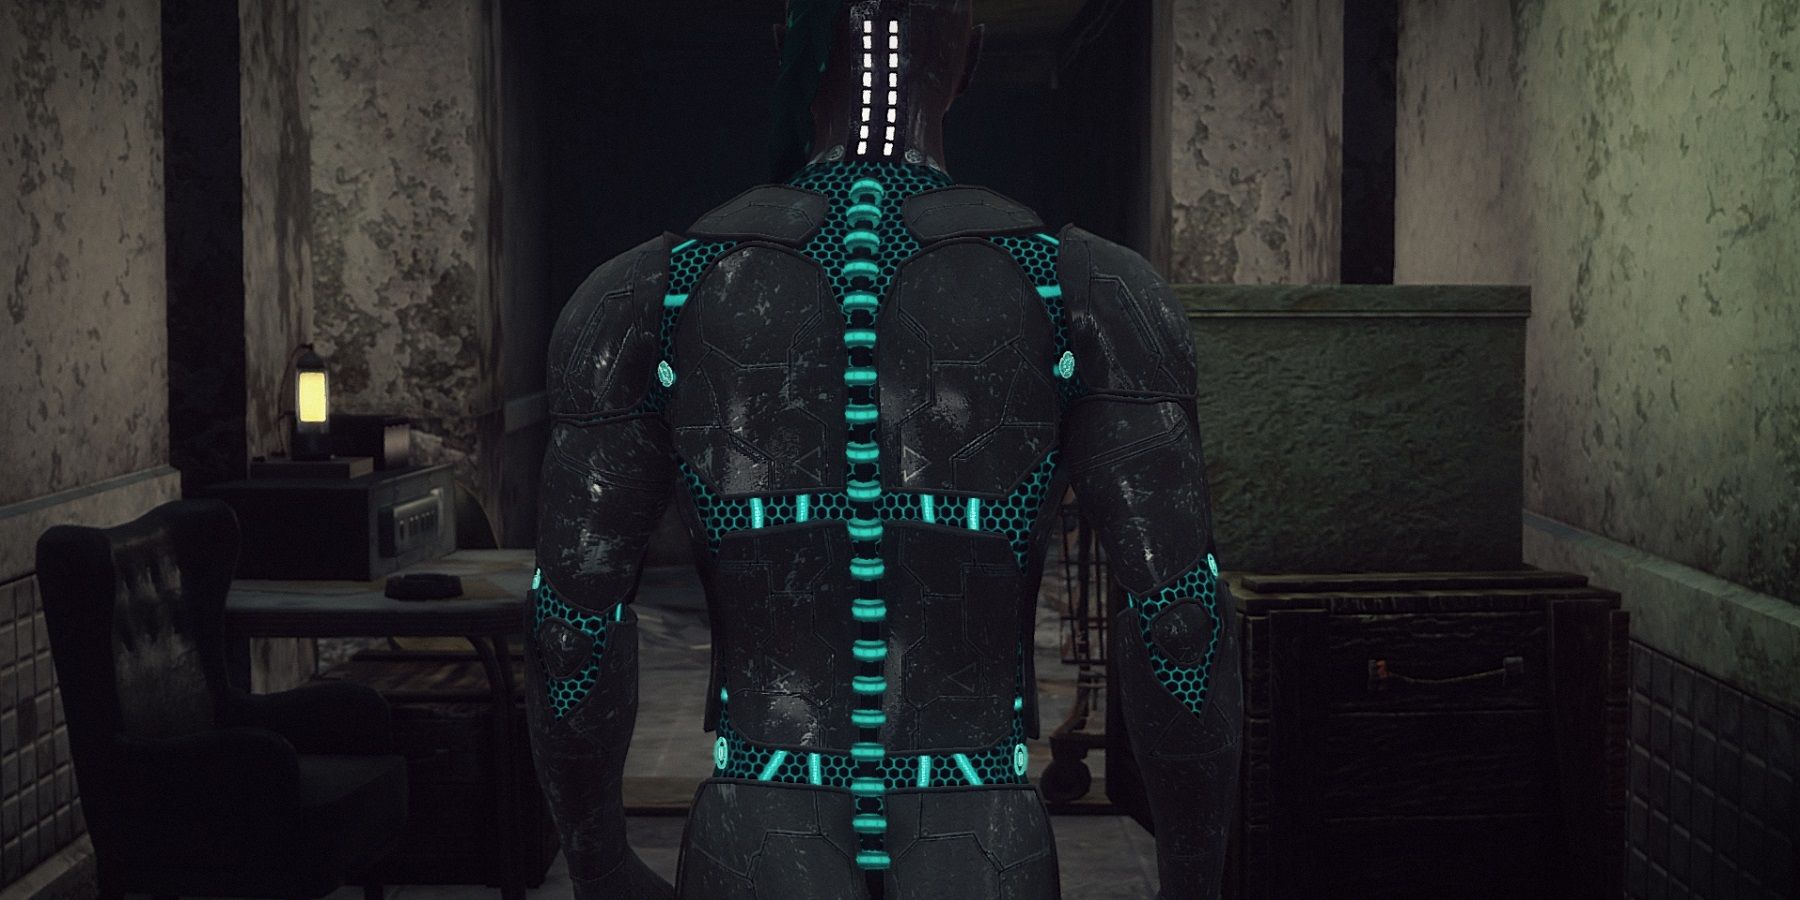 Image from the Falout: New Vegas mod "Apollo Androids" showing the spine of one of the droids.